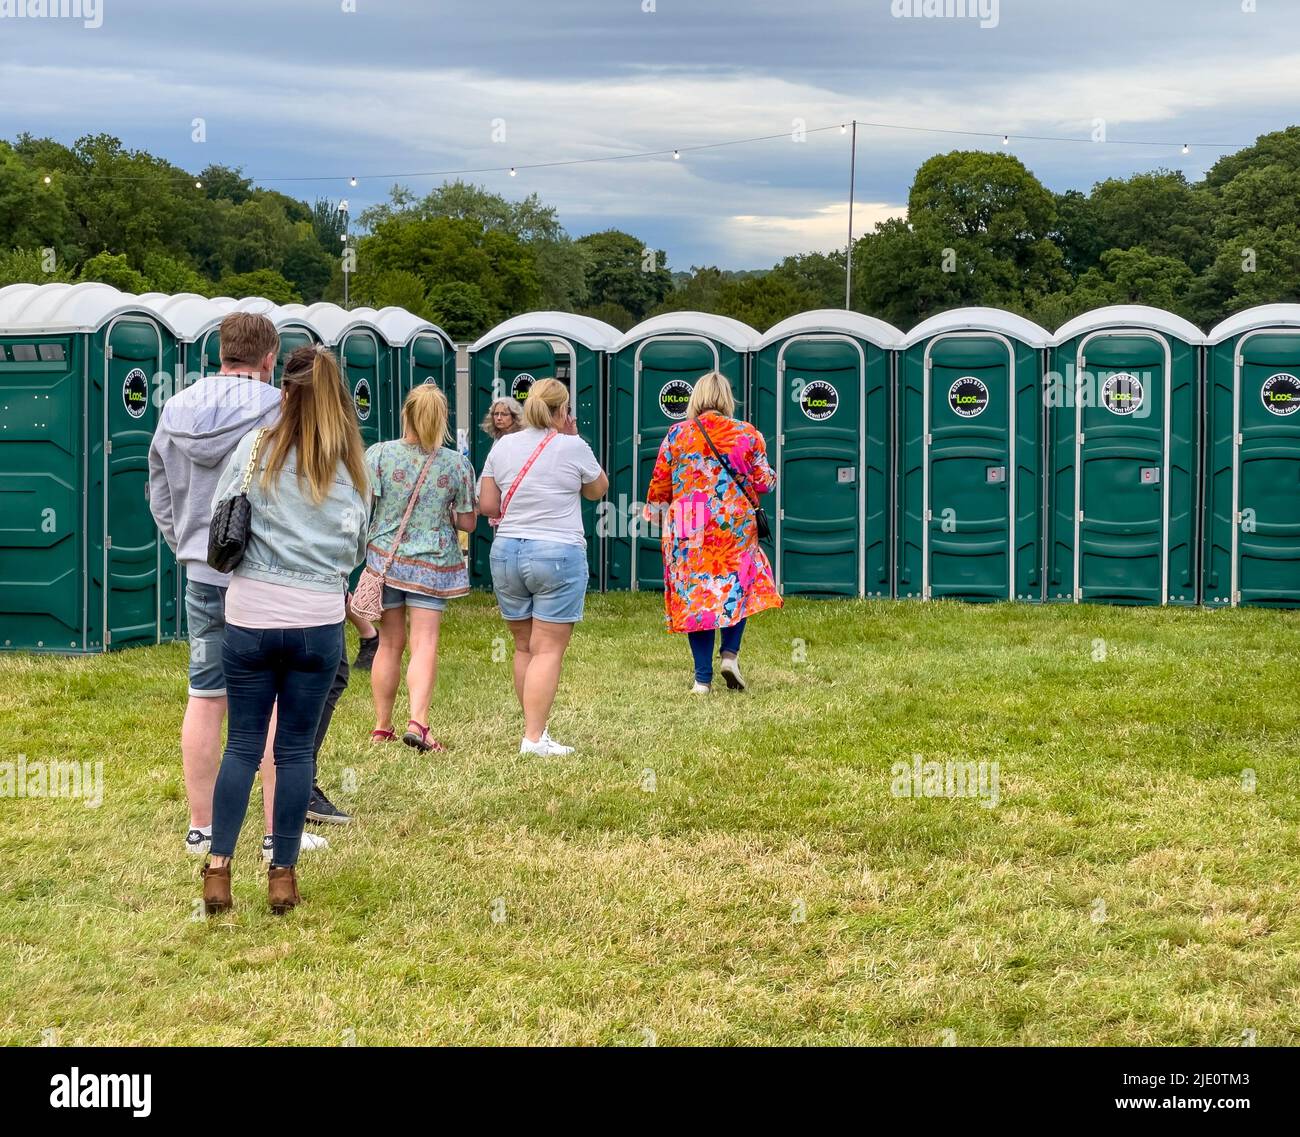 Queuing for the chemical toilets at an outdoor festival. Stock Photo